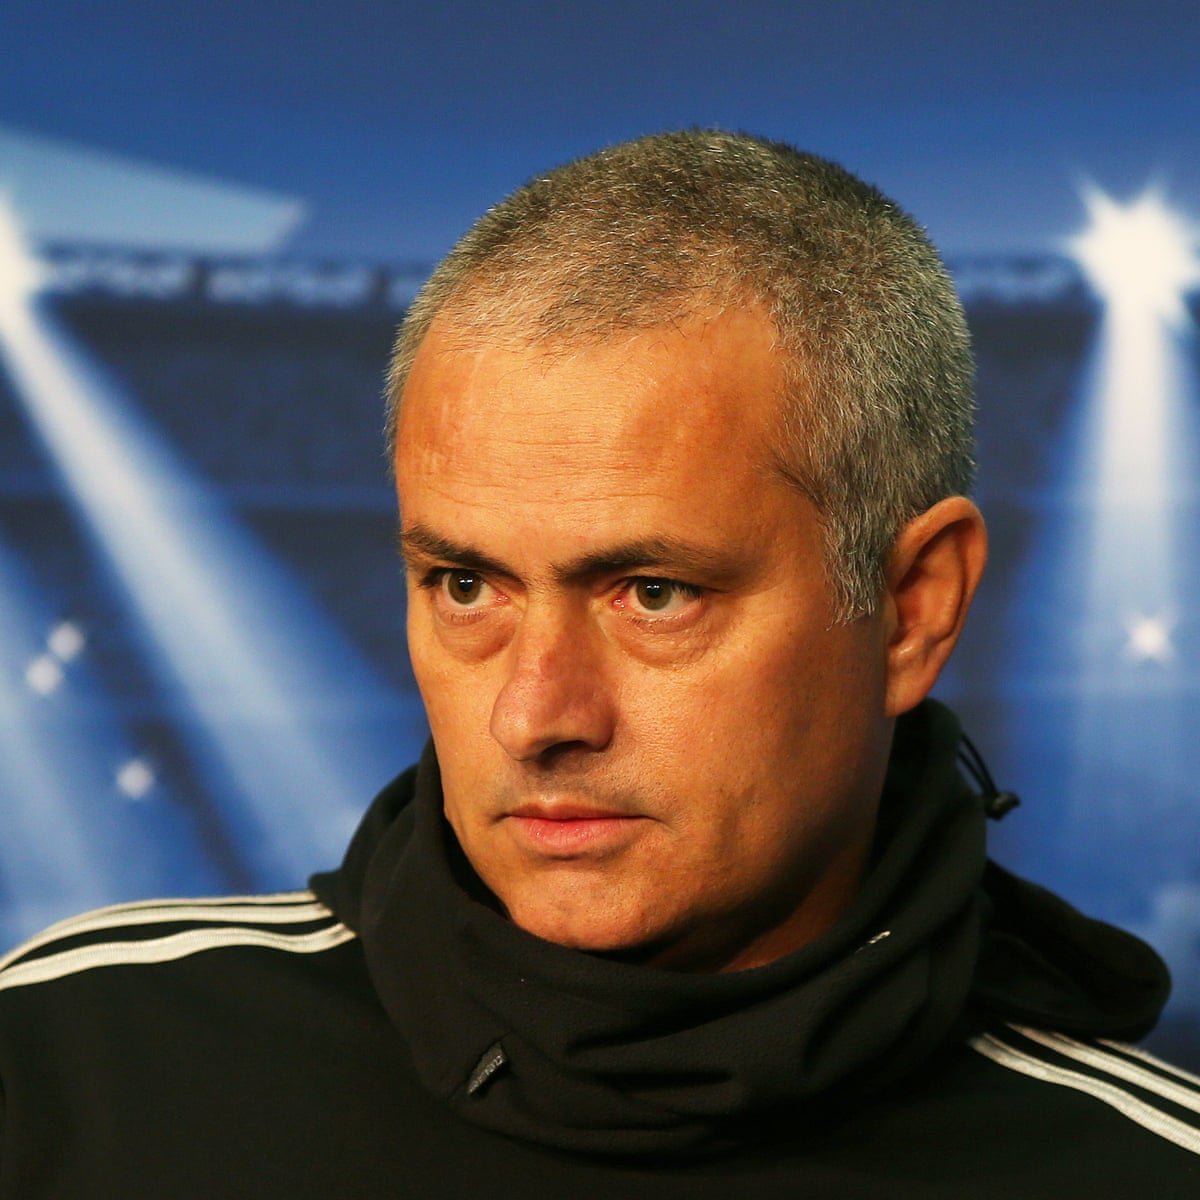 José Mourinho: key reflections on the Special One's wardrobe | Men's  fashion | The Guardian